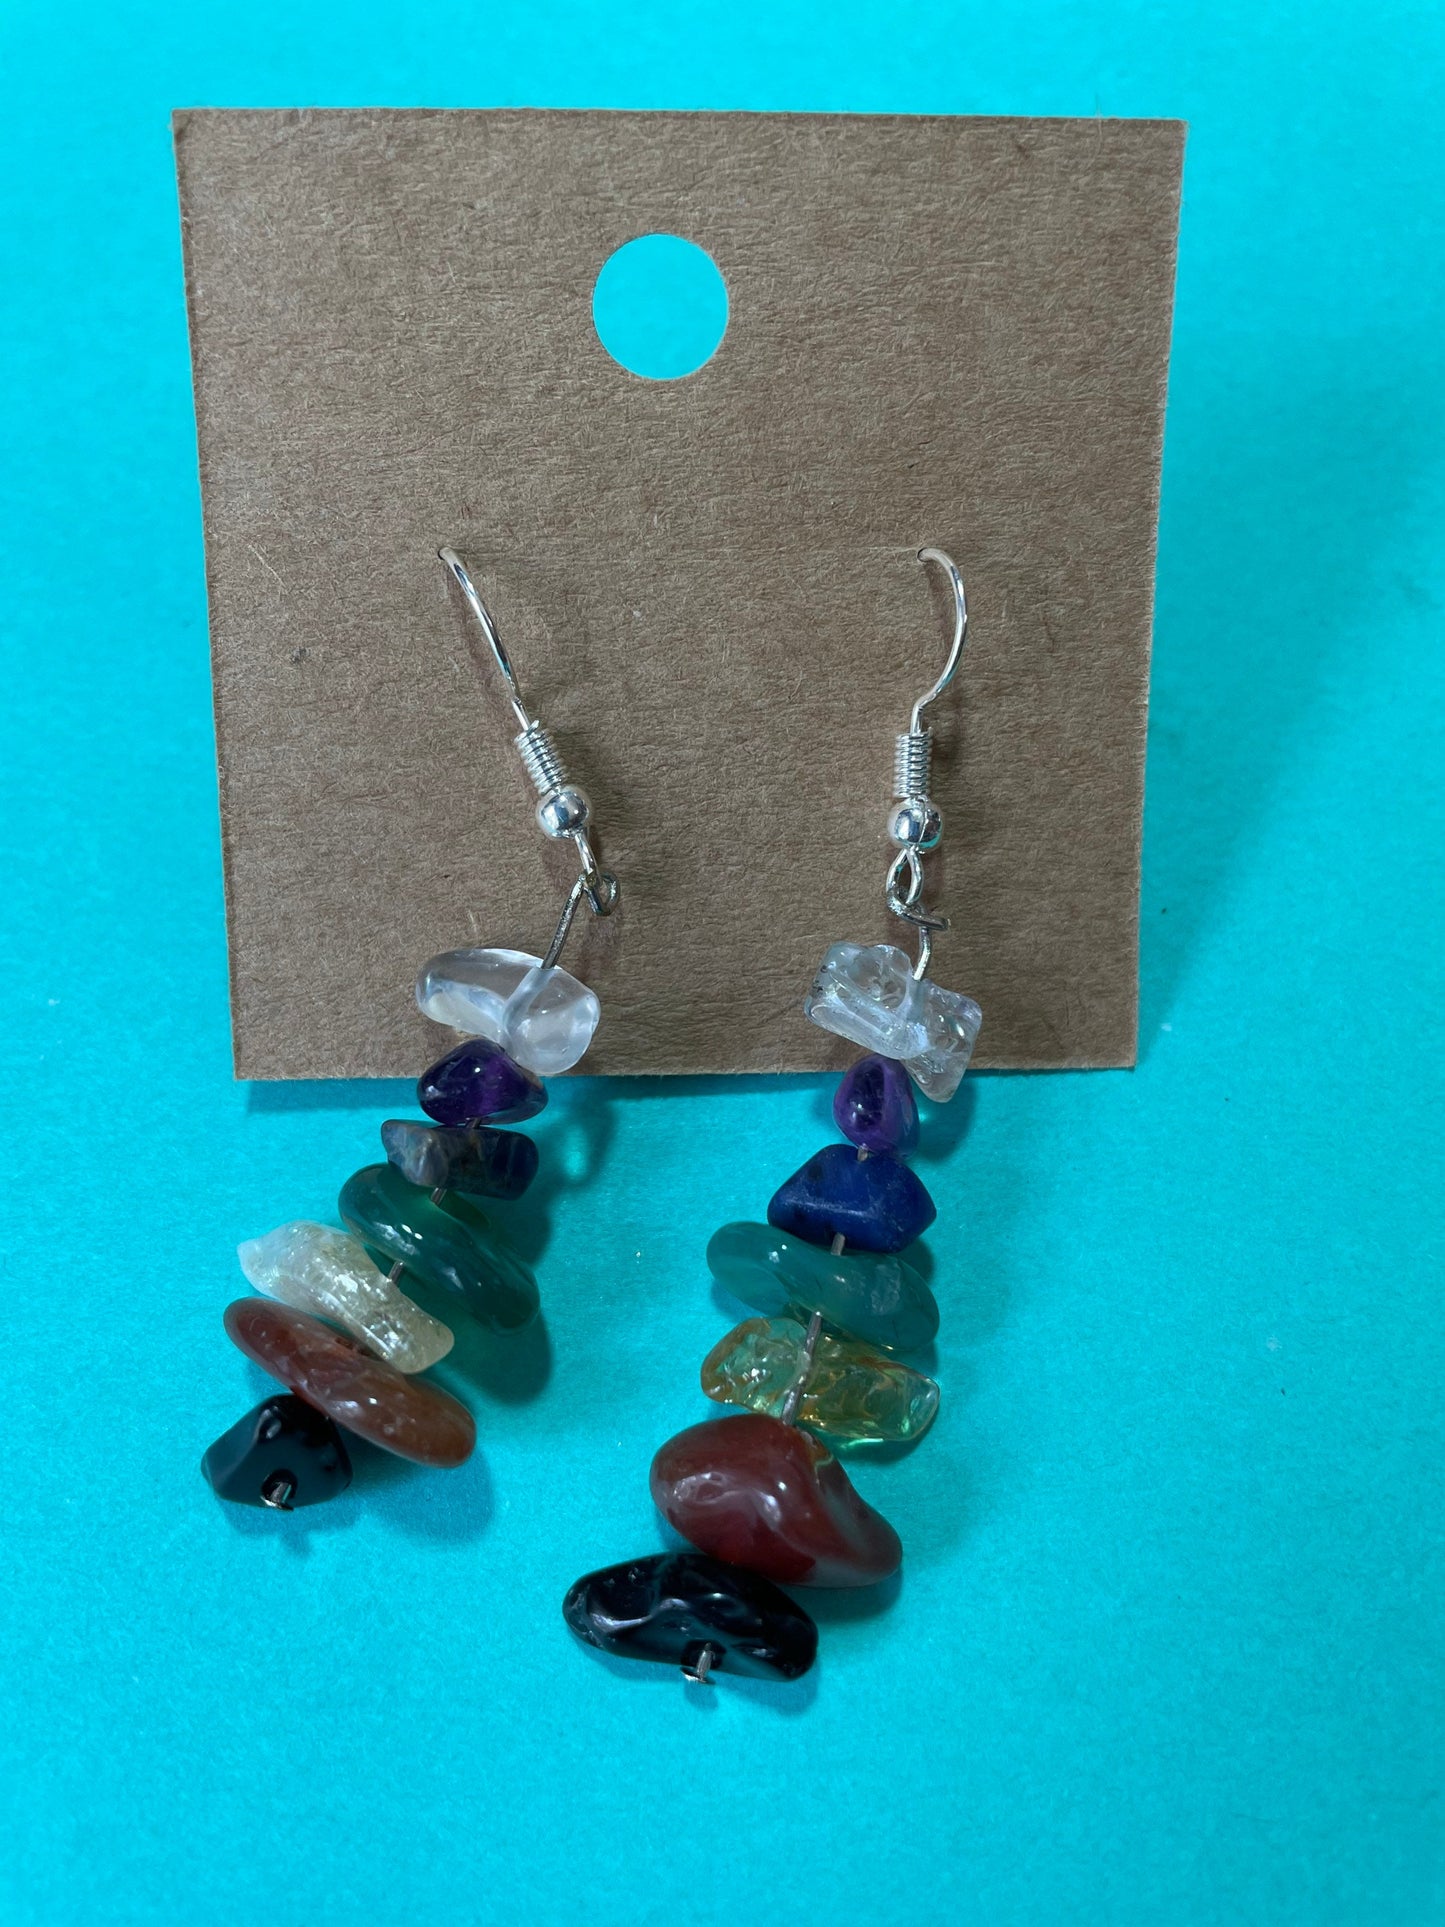 Beautiful Chakra earrings Chakras 1 through 7 are represented in this set